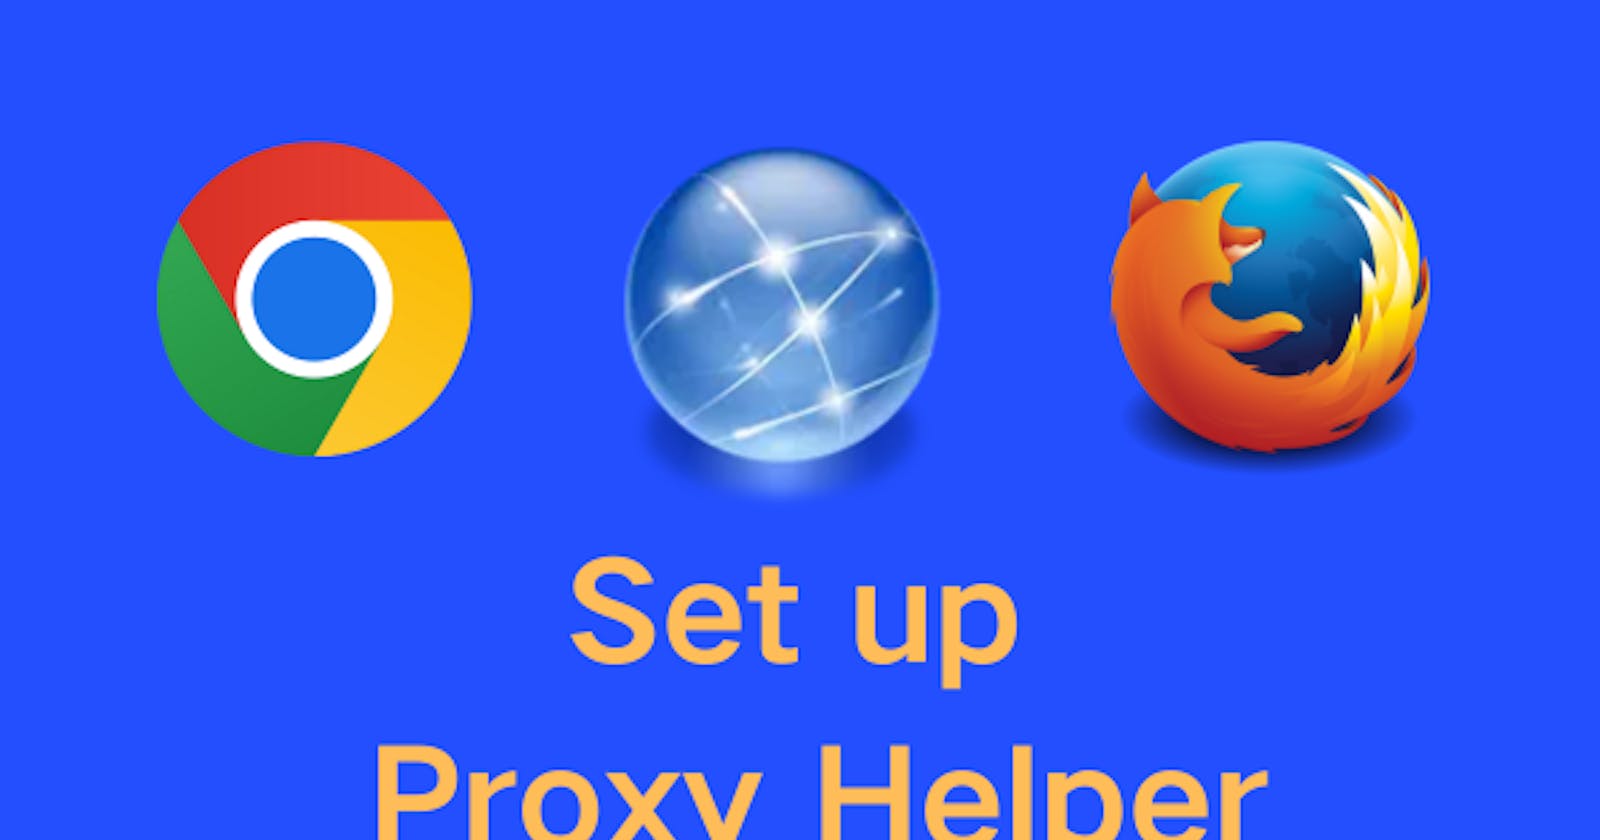 How to set up Proxy Helper in Chrome and Firefox